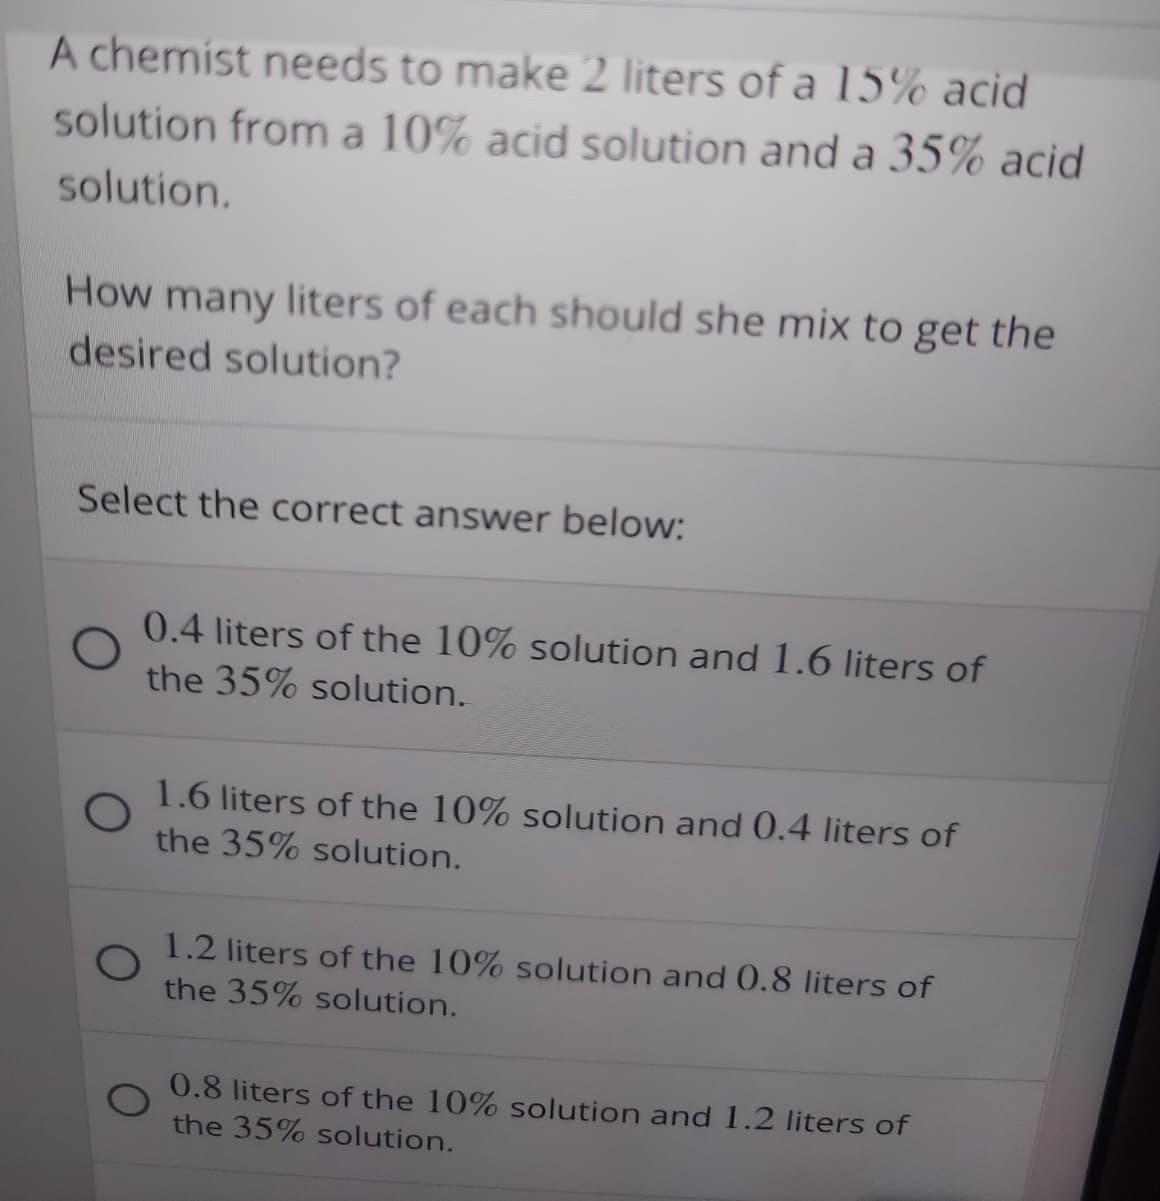 A chemist needs to make 2 liters of a 15% acid
solution from a 10% acid solution and a 35% acid
solution.
How many liters of each should she mix to get the
desired solution?
Select the correct answer below:
0.4 liters of the 10% solution and 1.6 liters of
the 35% solution.
1.6 liters of the 10% solution and 0.4 liters of
the 35% solution.
1.2 liters of the 10% solution and 0.8 liters of
the 35% solution.
0.8 liters of the 10% solution and 1.2 liters of
the 35% solution.
